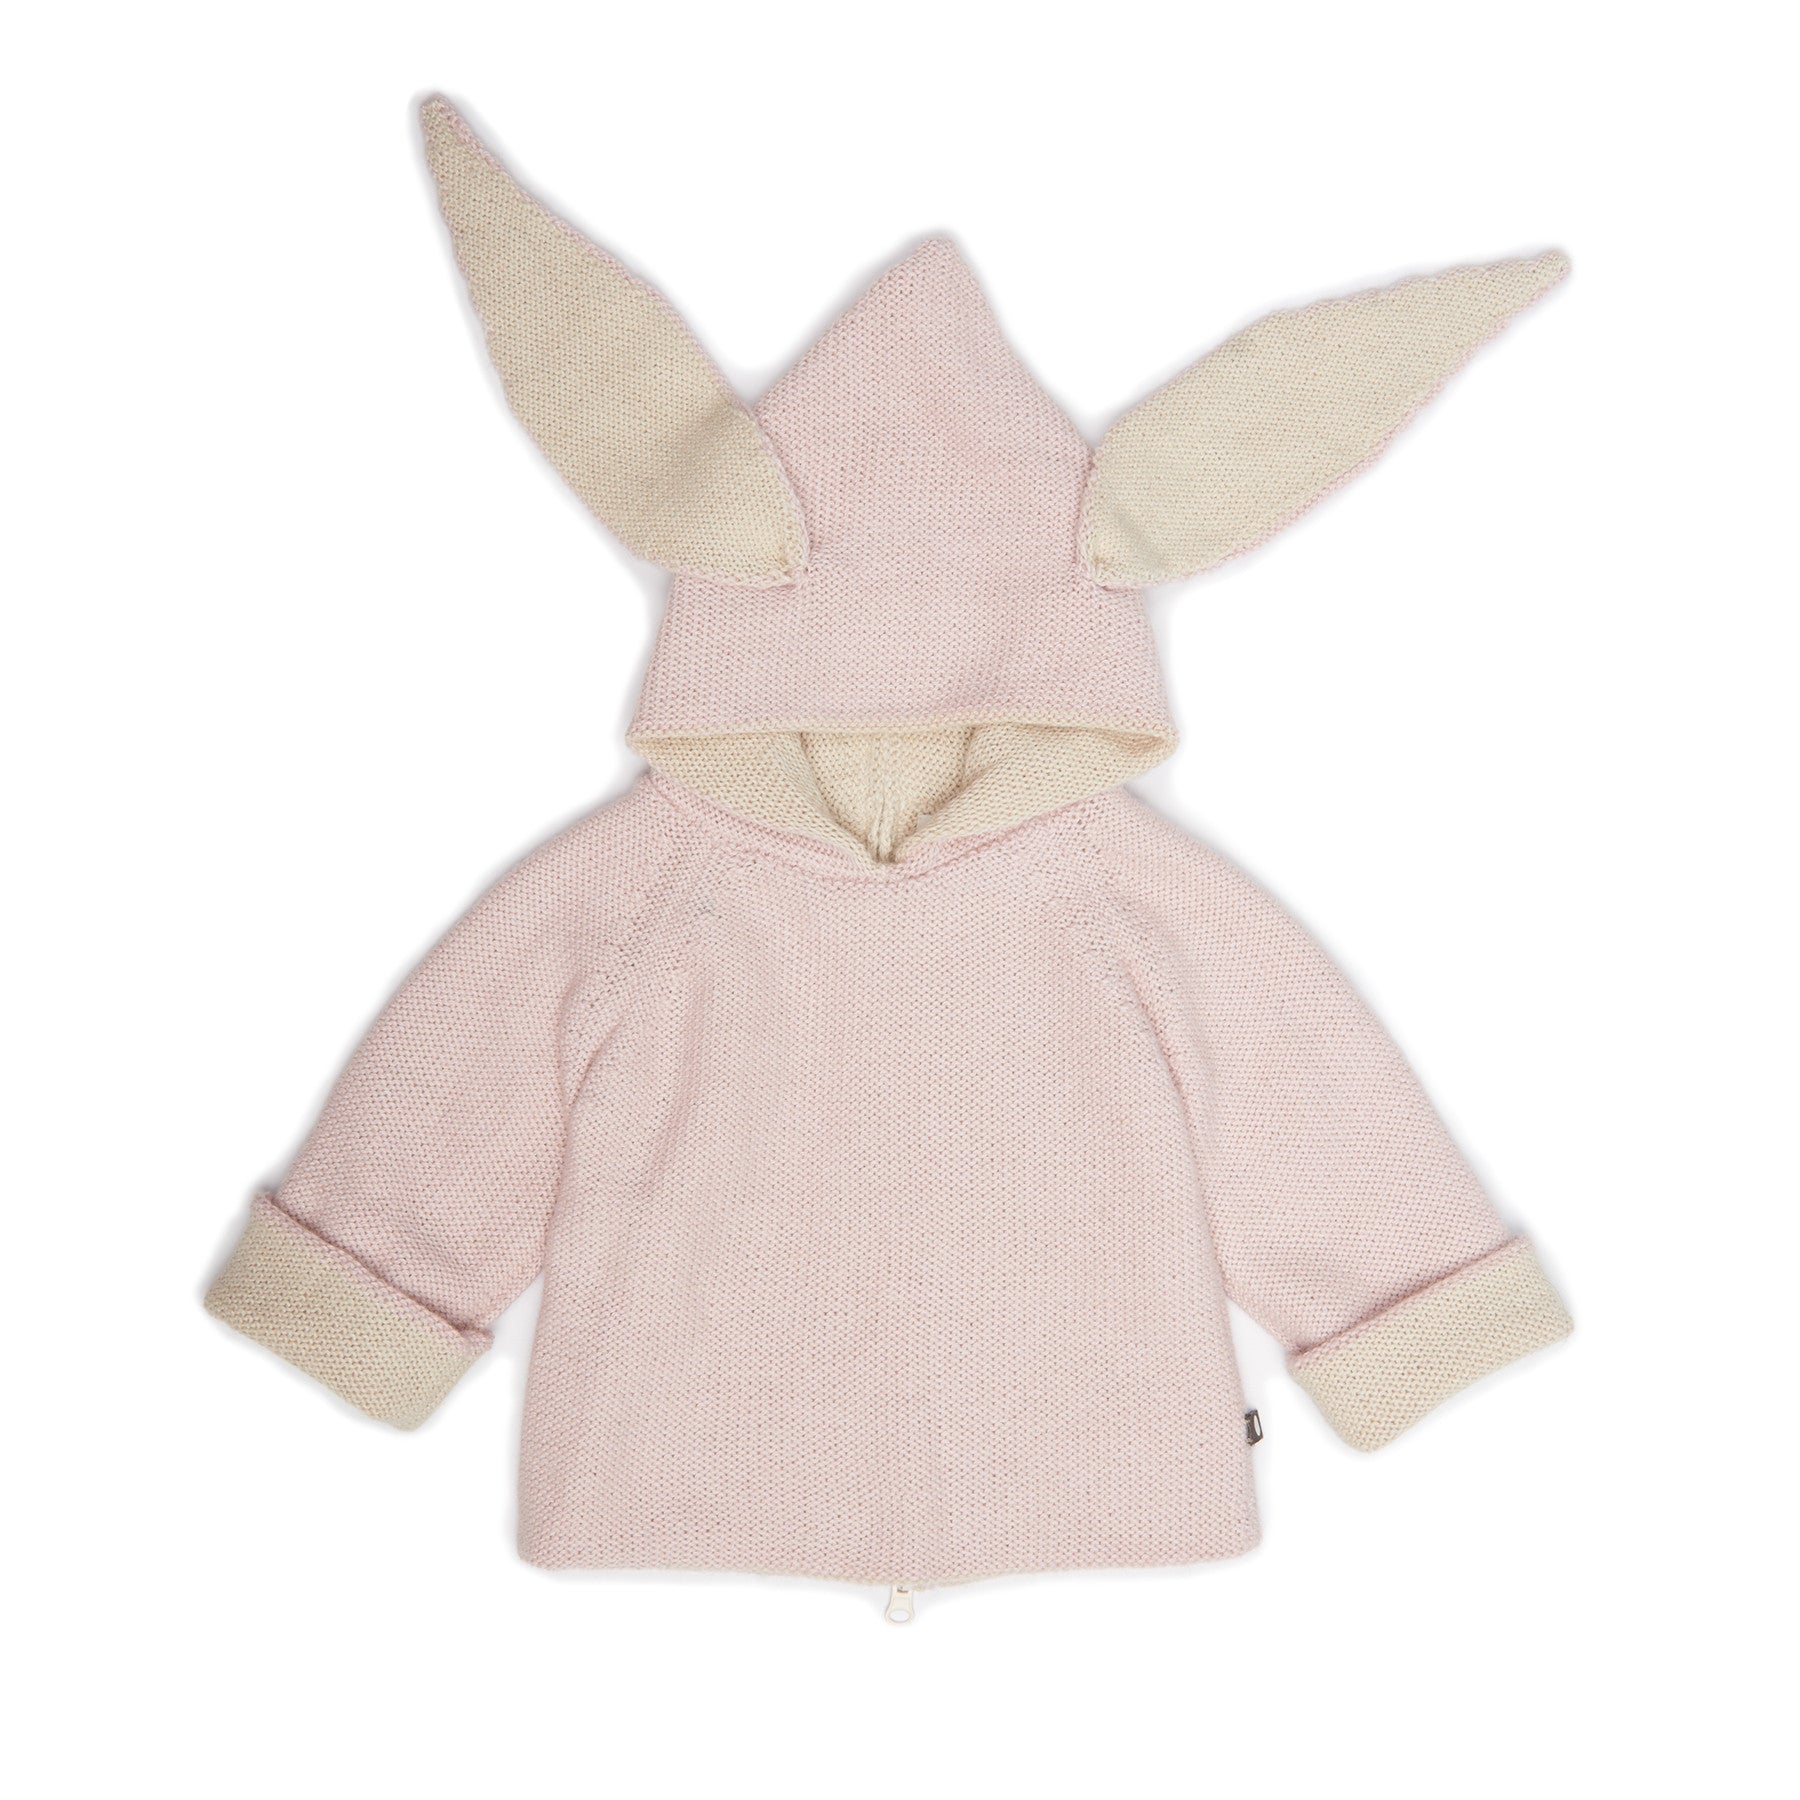 Baby Light Pink Hooded Bunny Trims Sweater - CÉMAROSE | Children's Fashion Store